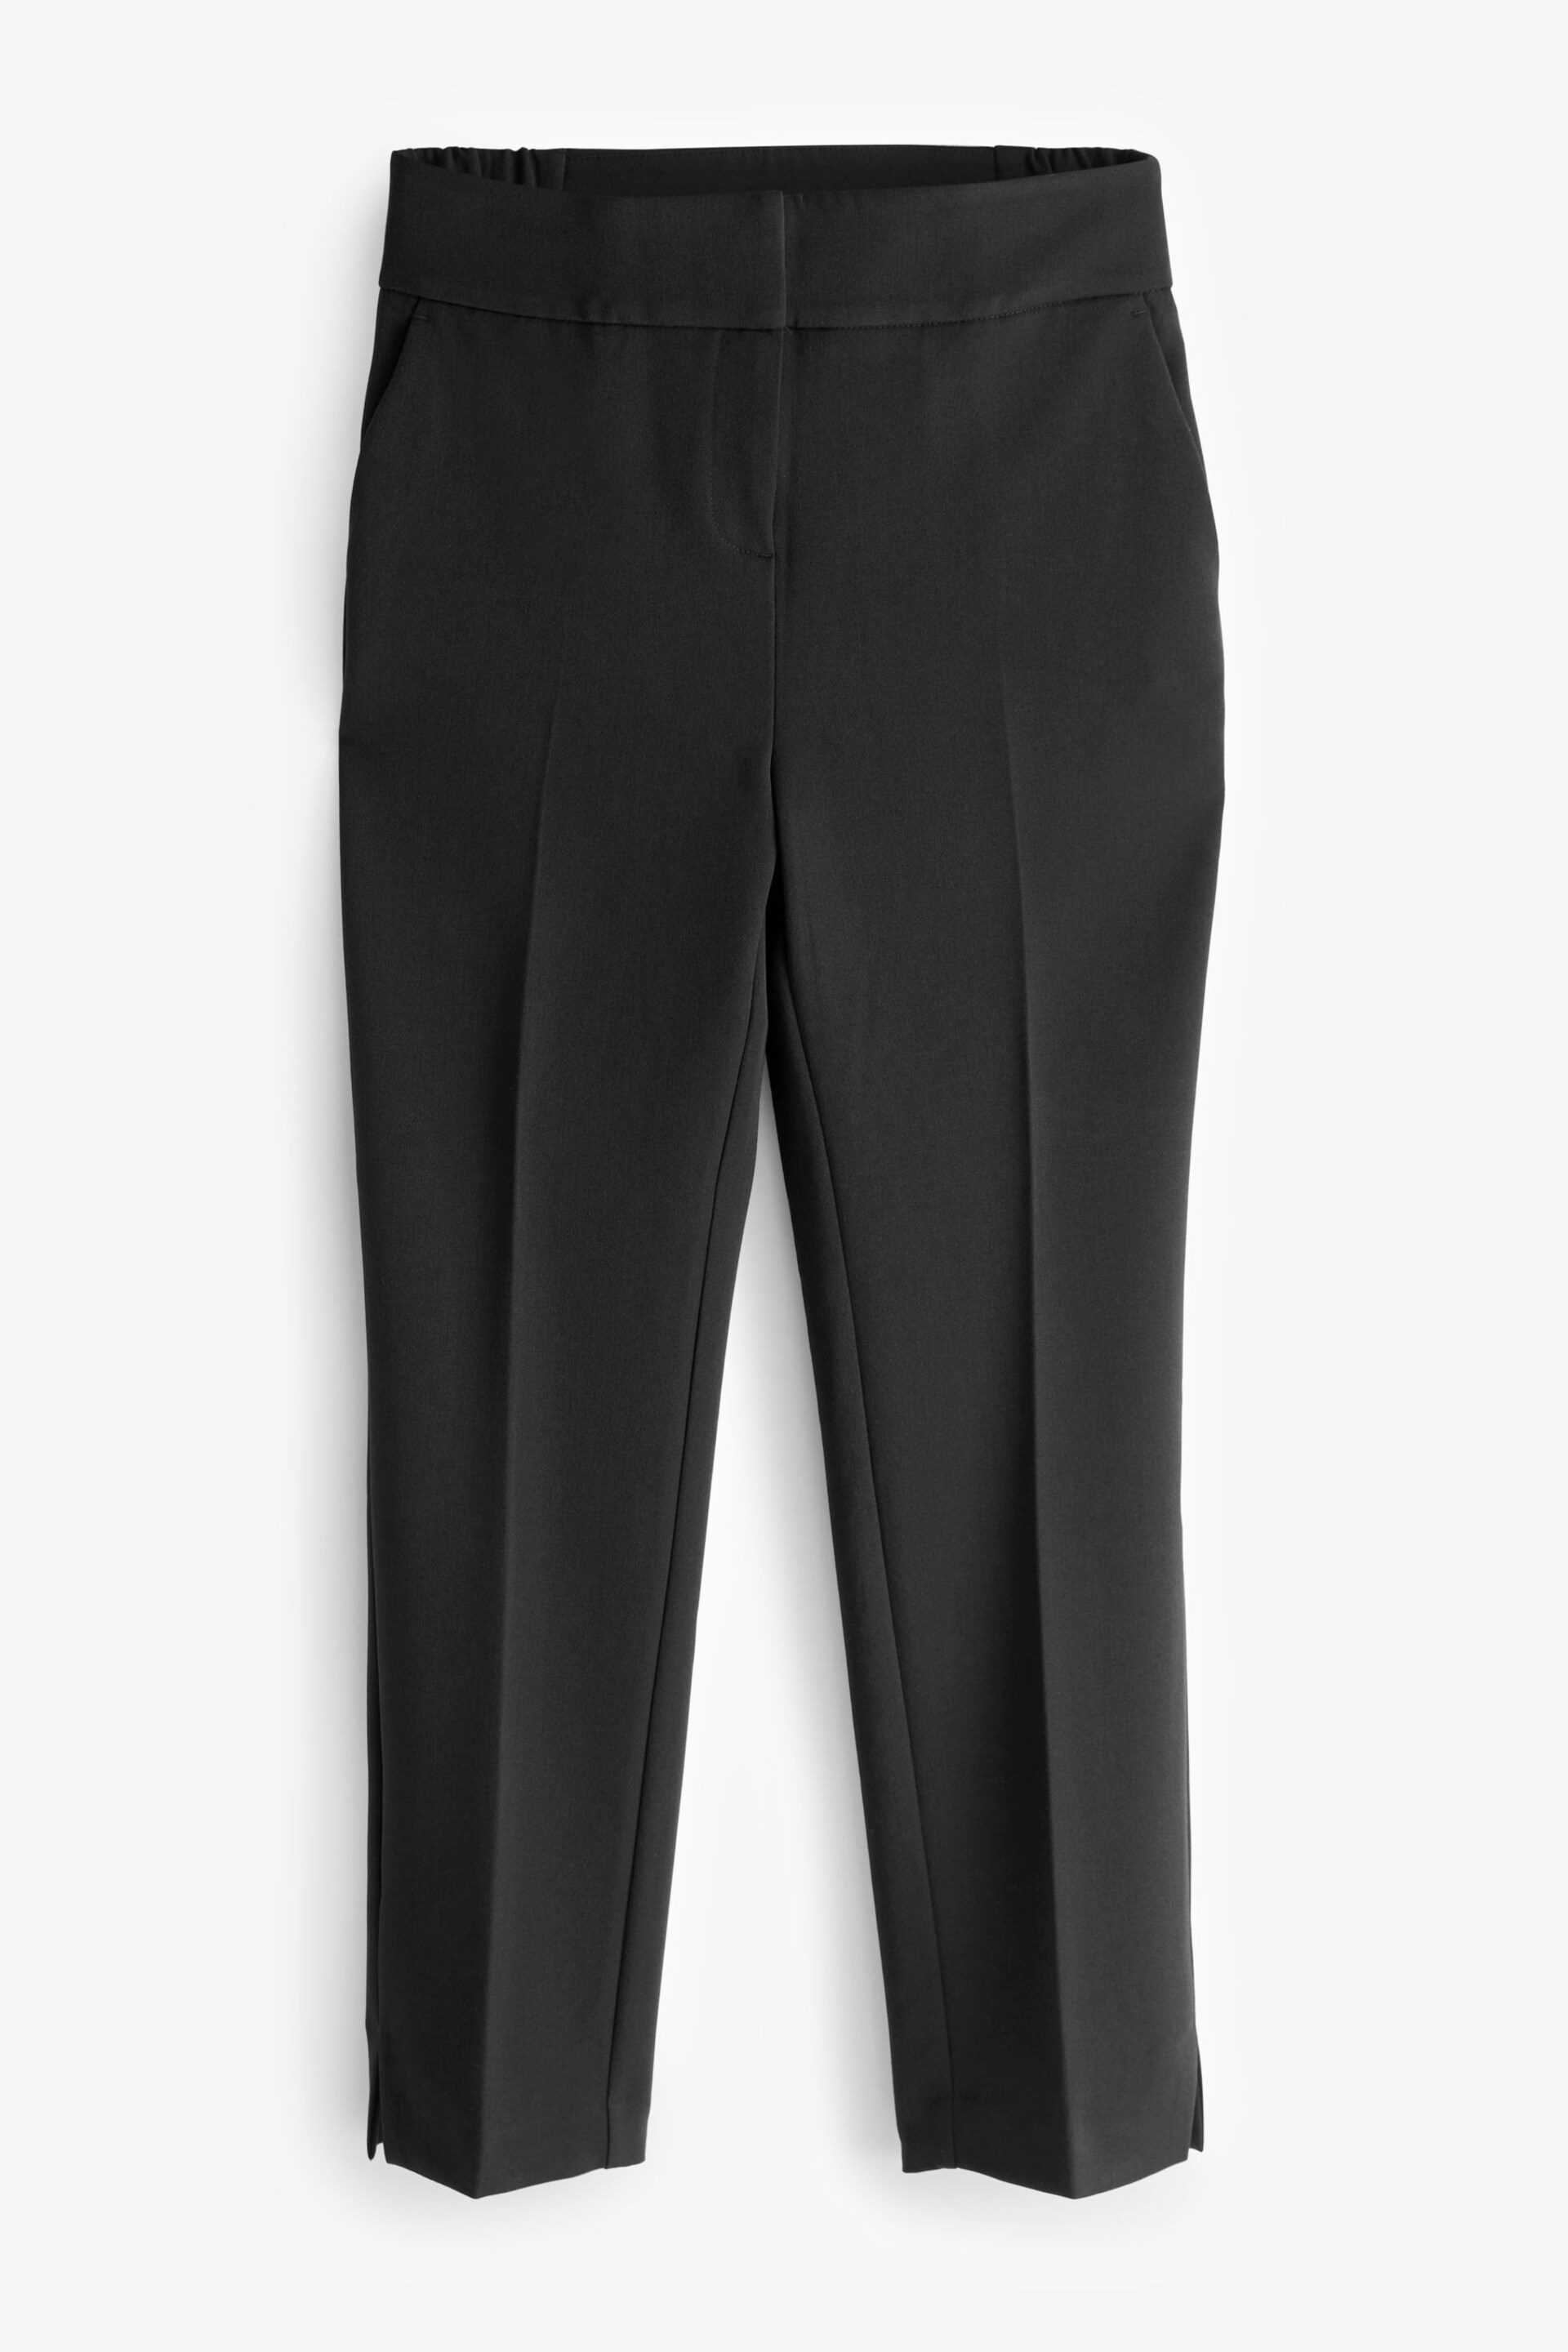 Black Slim Tailored Trousers - Image 5 of 6